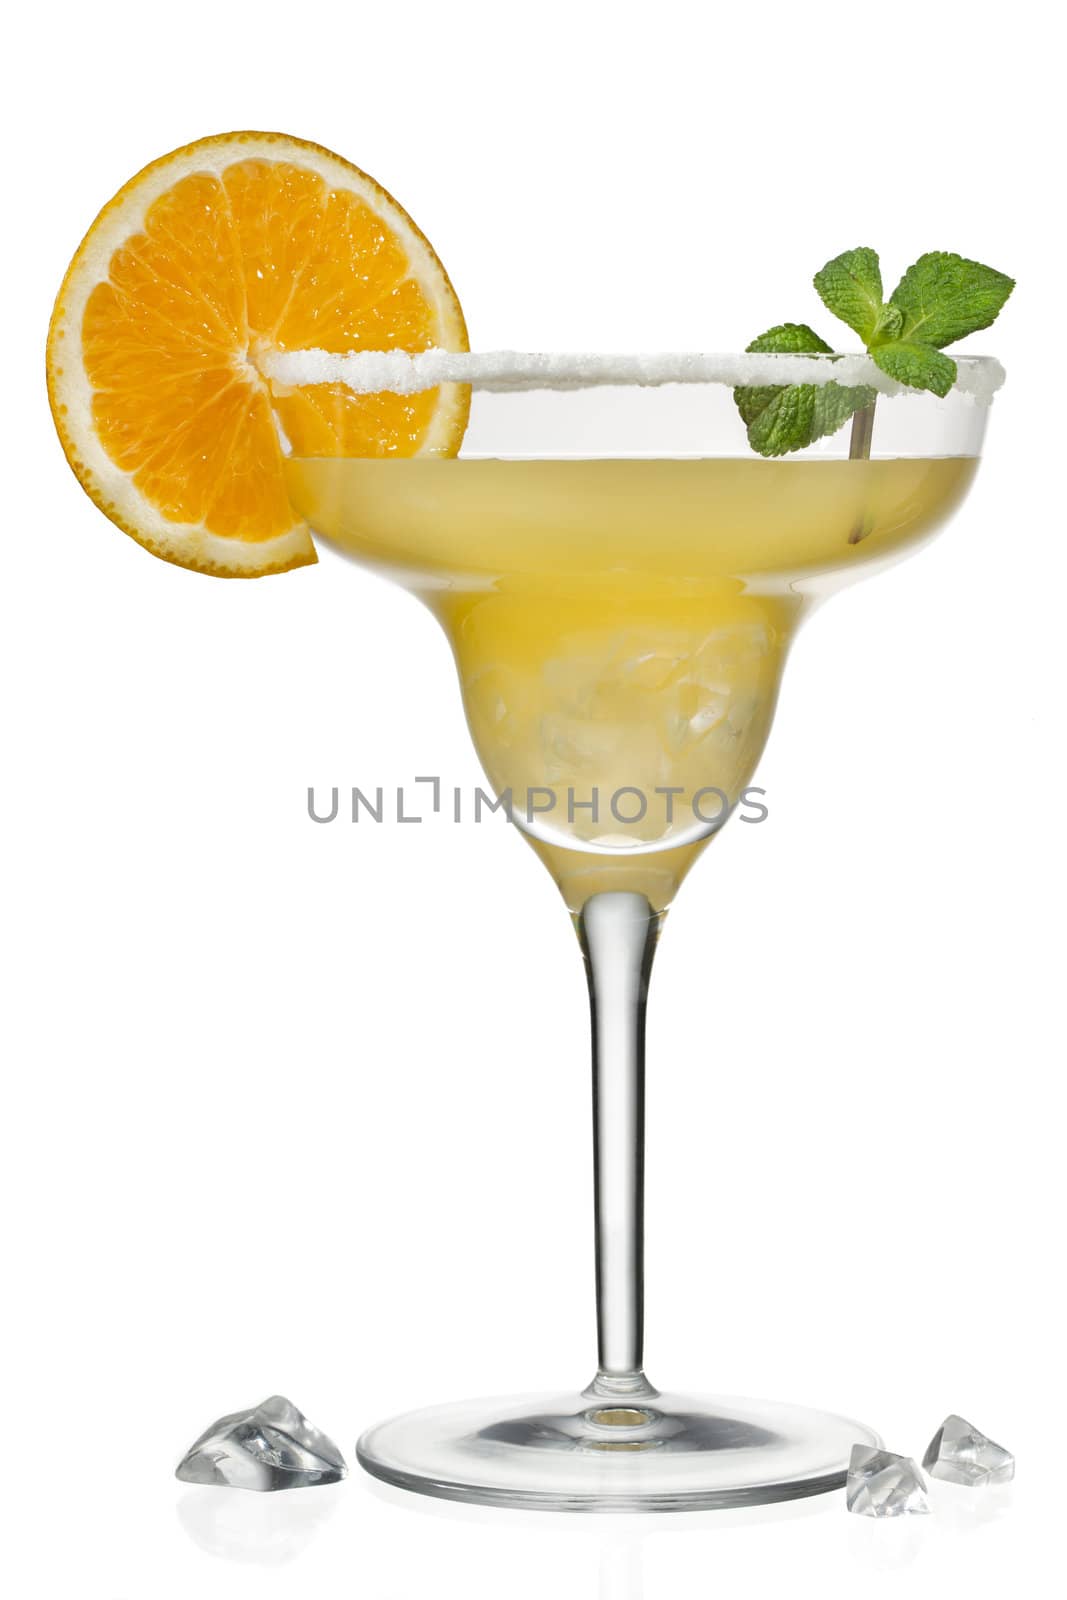 orange juice in martini glass with slice of a orange and mint leaf